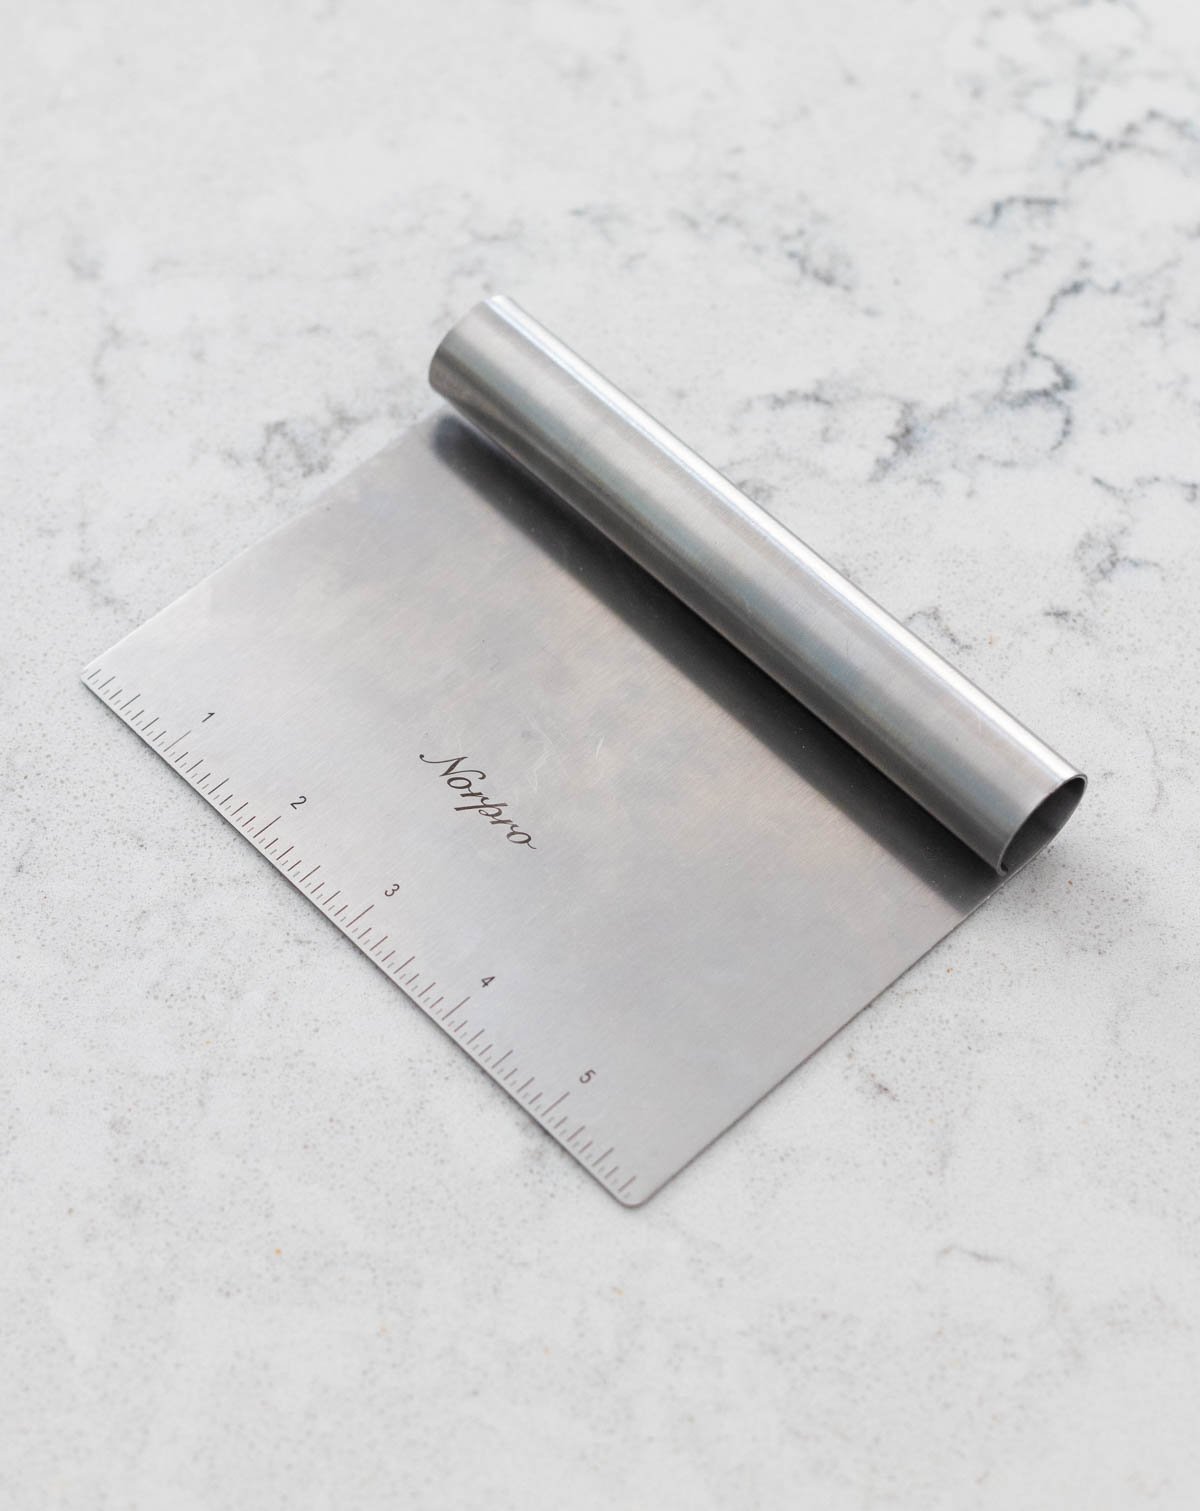 A metal dough scraper is on the counter.